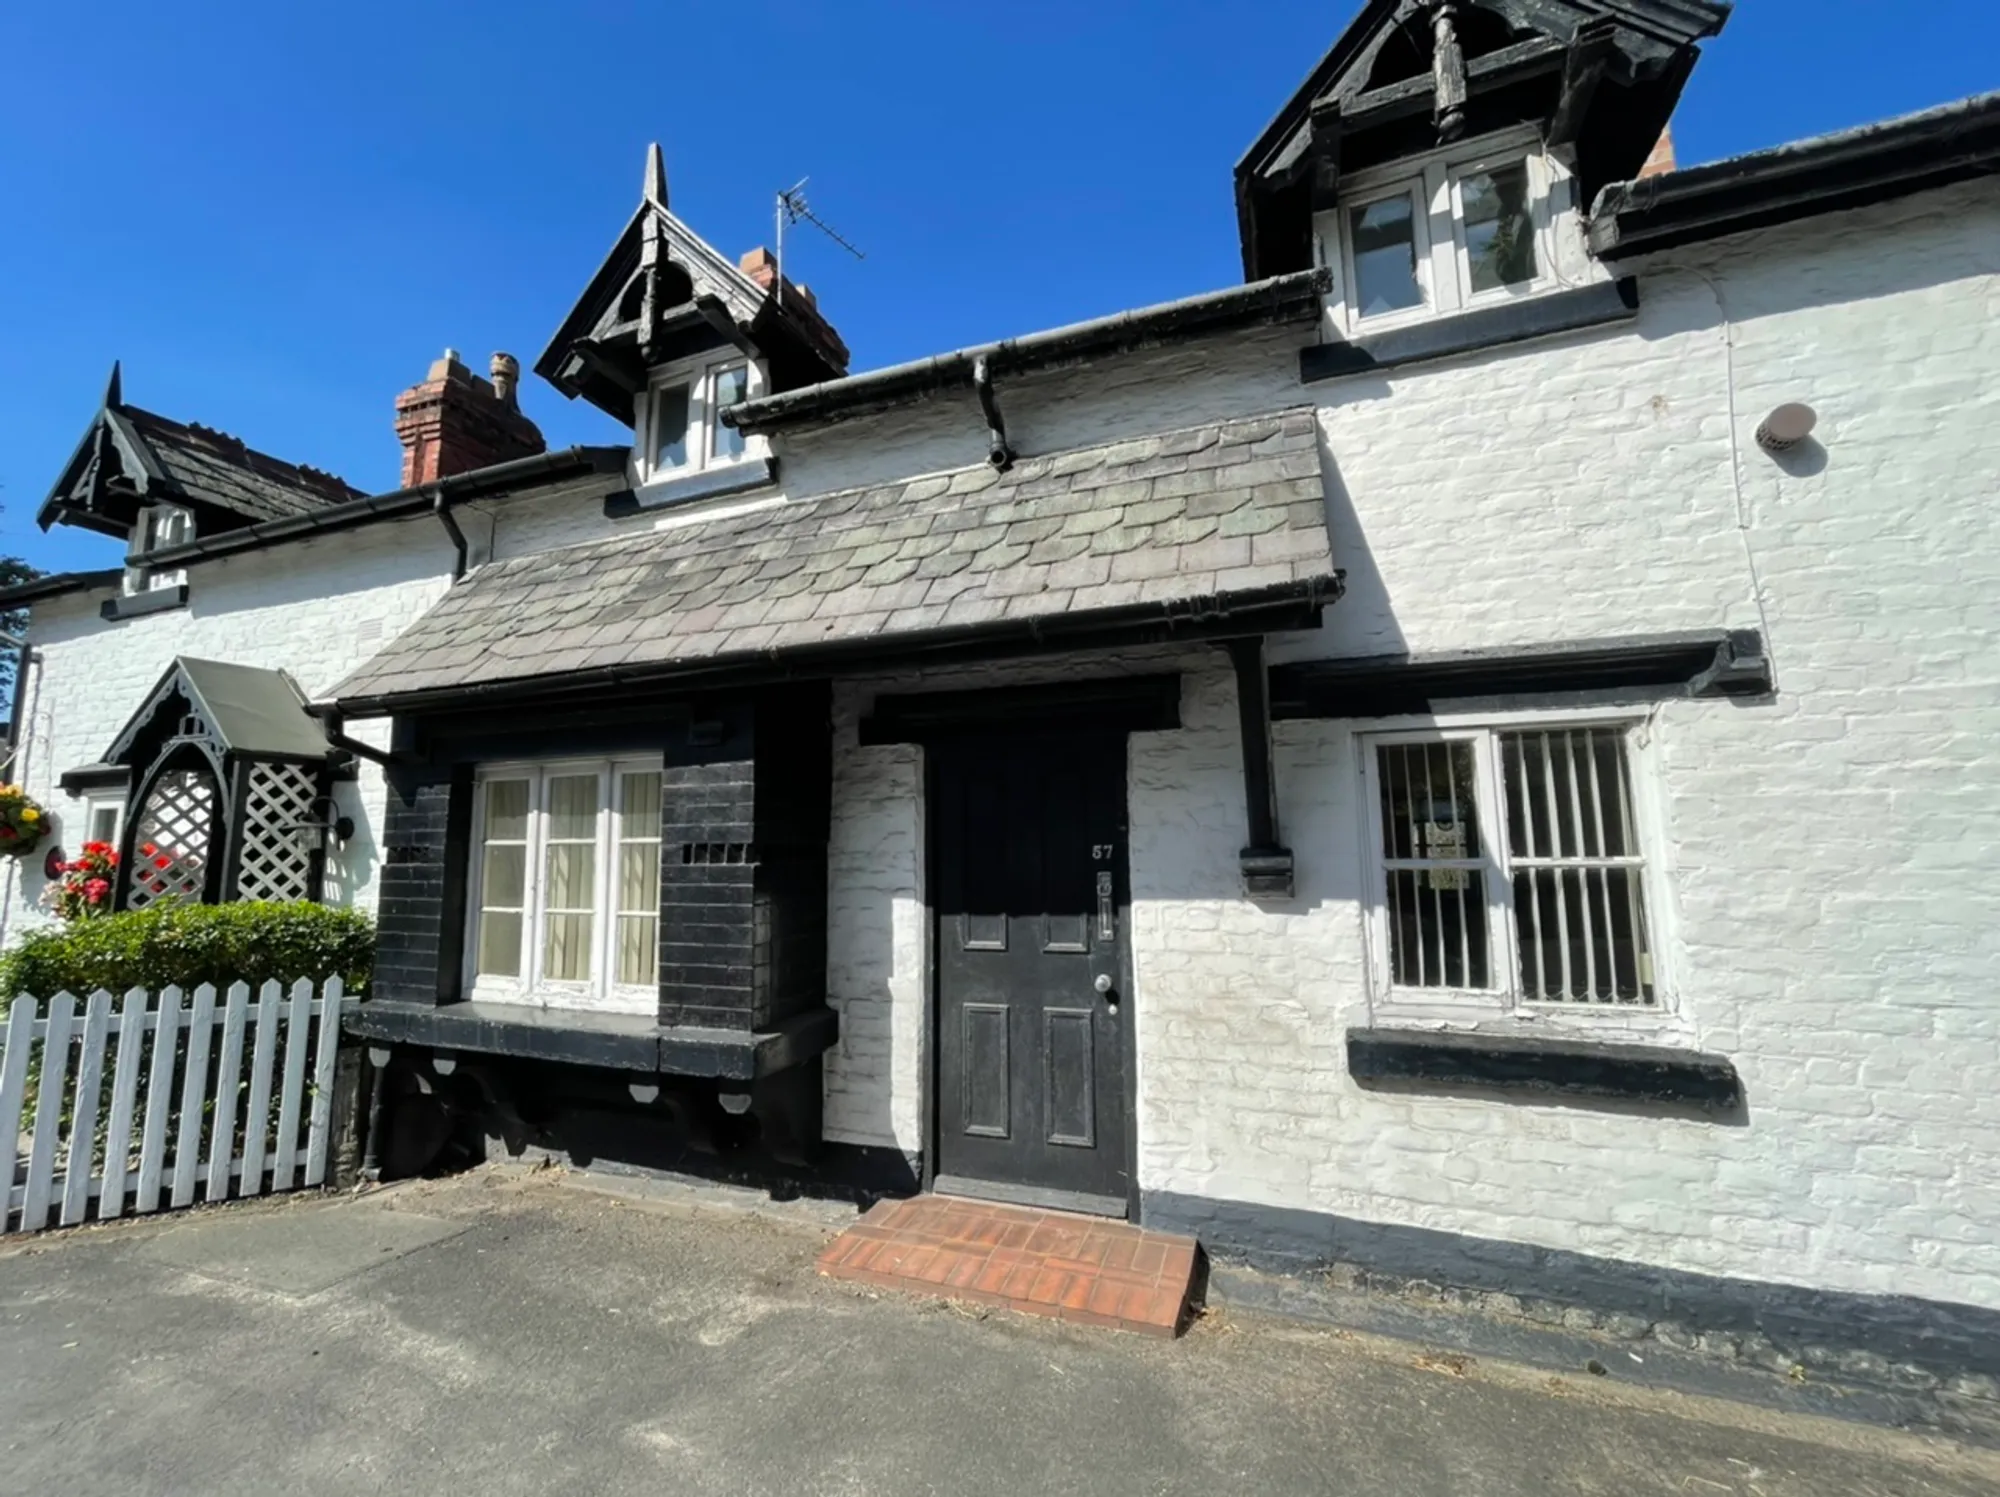 Exciting Grade II Listed cottage in Hale Village, a renovation project with a semi-rural charm near amenities and transport links. Online auction on 29th May. Ideal for developers seeking a prime investment. Contact North Wall for a viewing appointment.